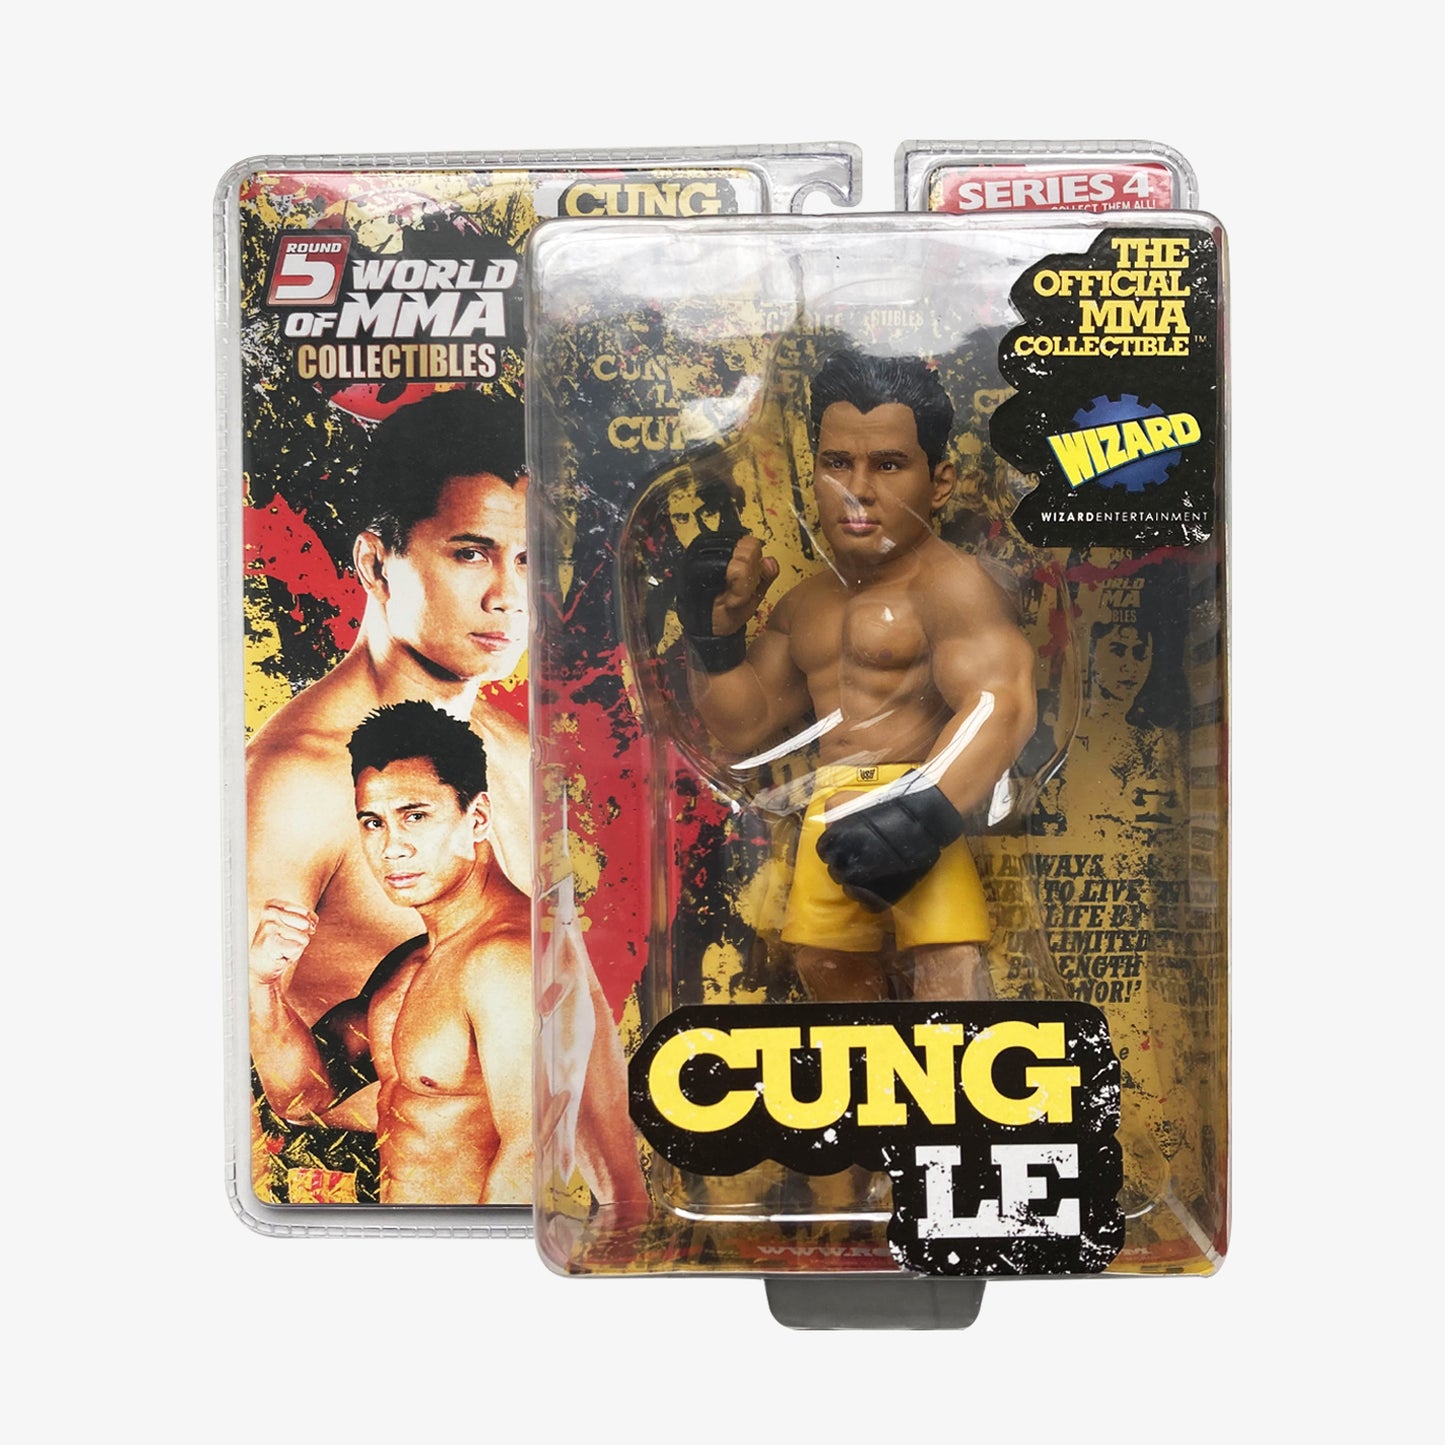 Round 5 WOMMA Series 4 - Cung Le (Wizard Entertainment Exclusive)